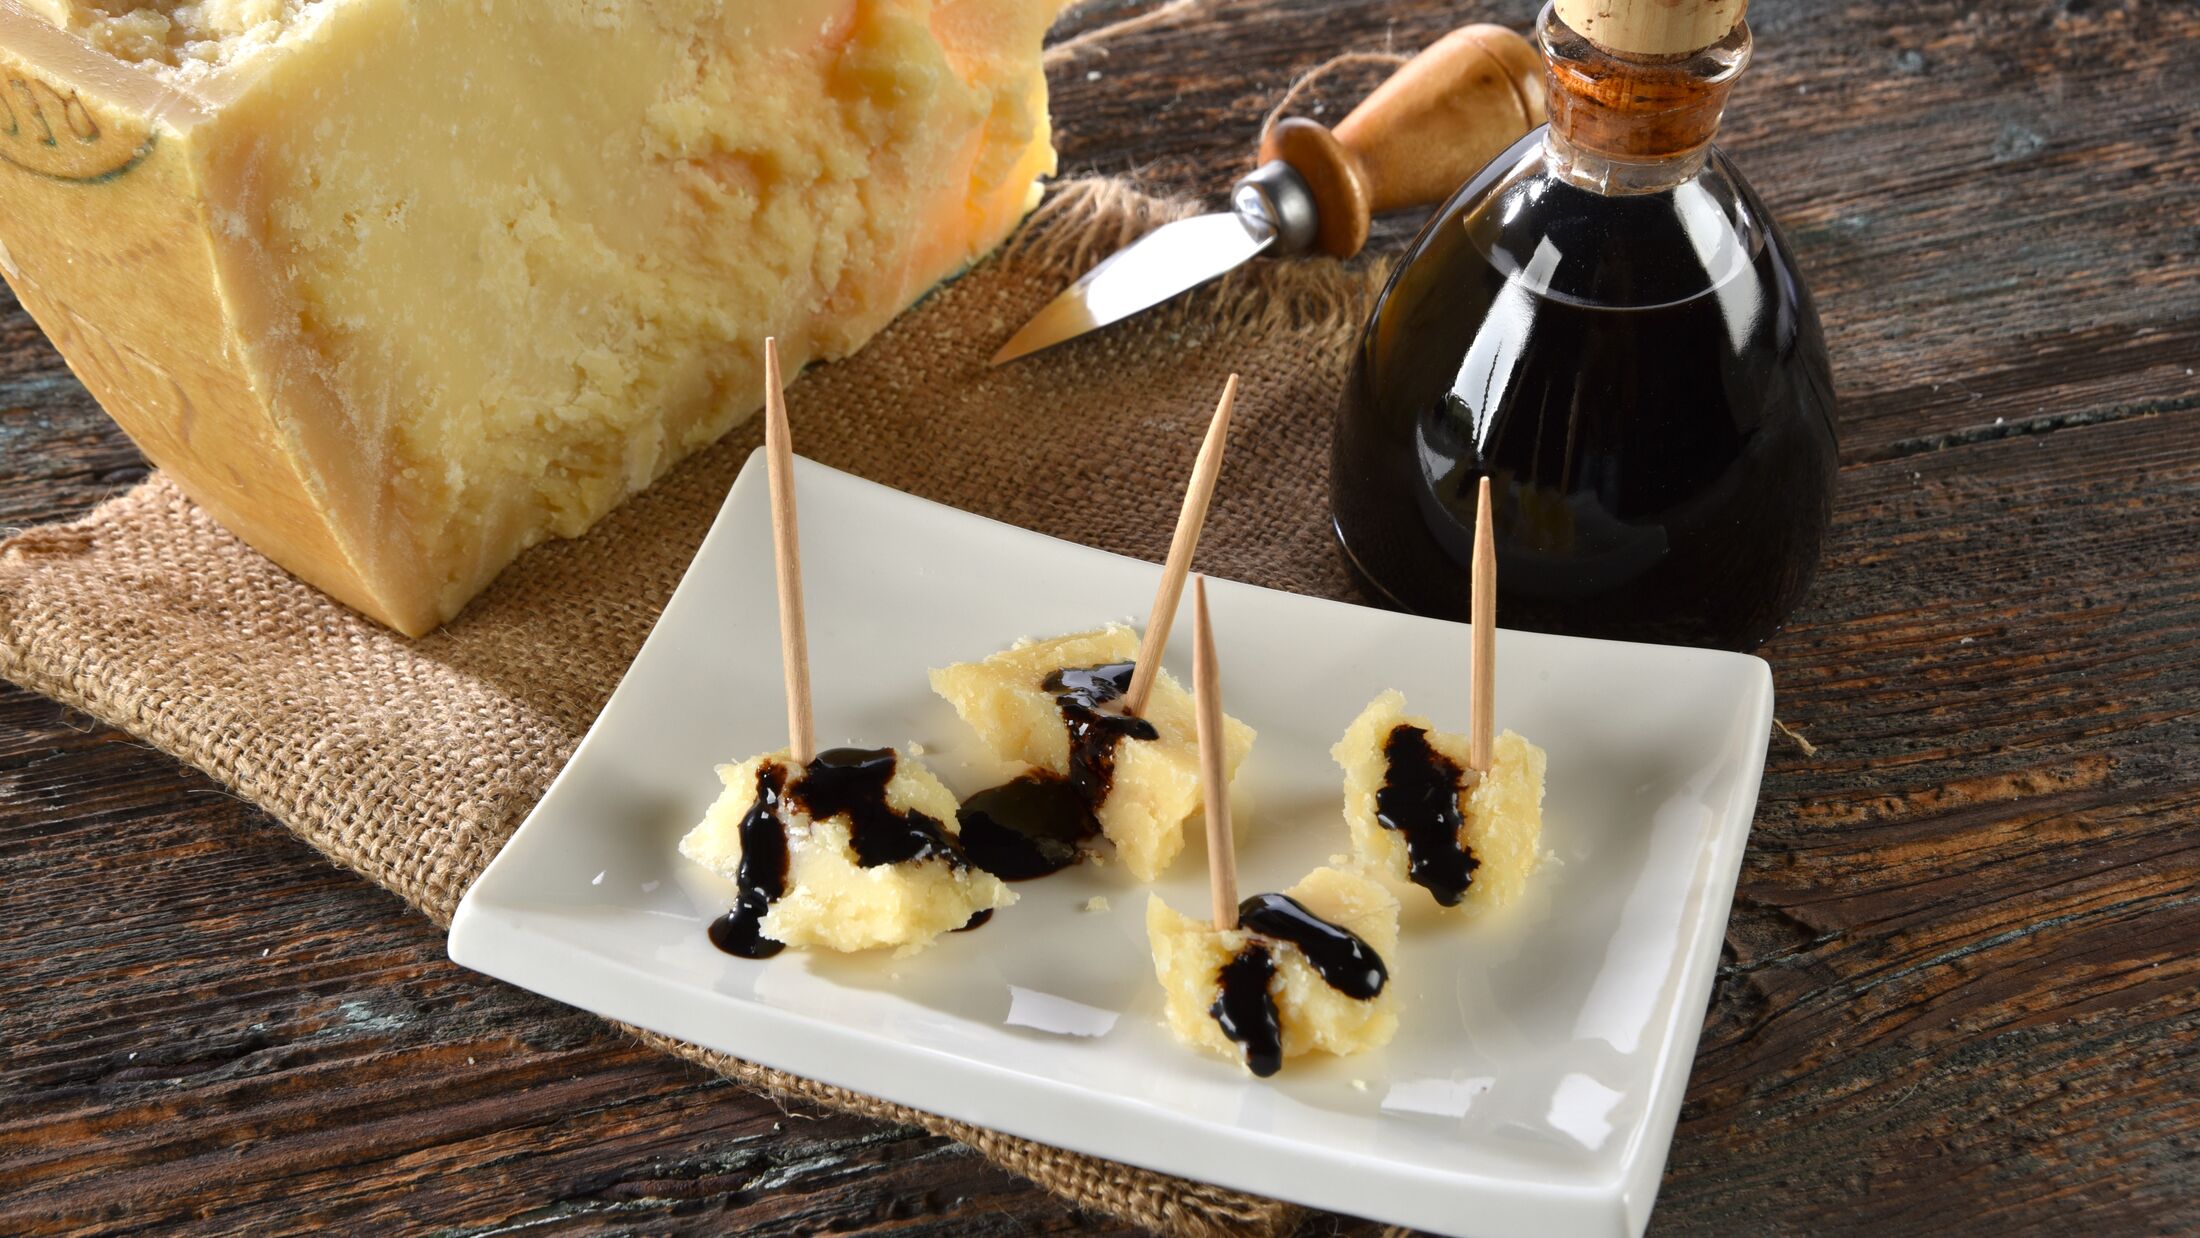 delight with Balsamic vinegar of Modena and Parmigiano Reggiano on a rustic table